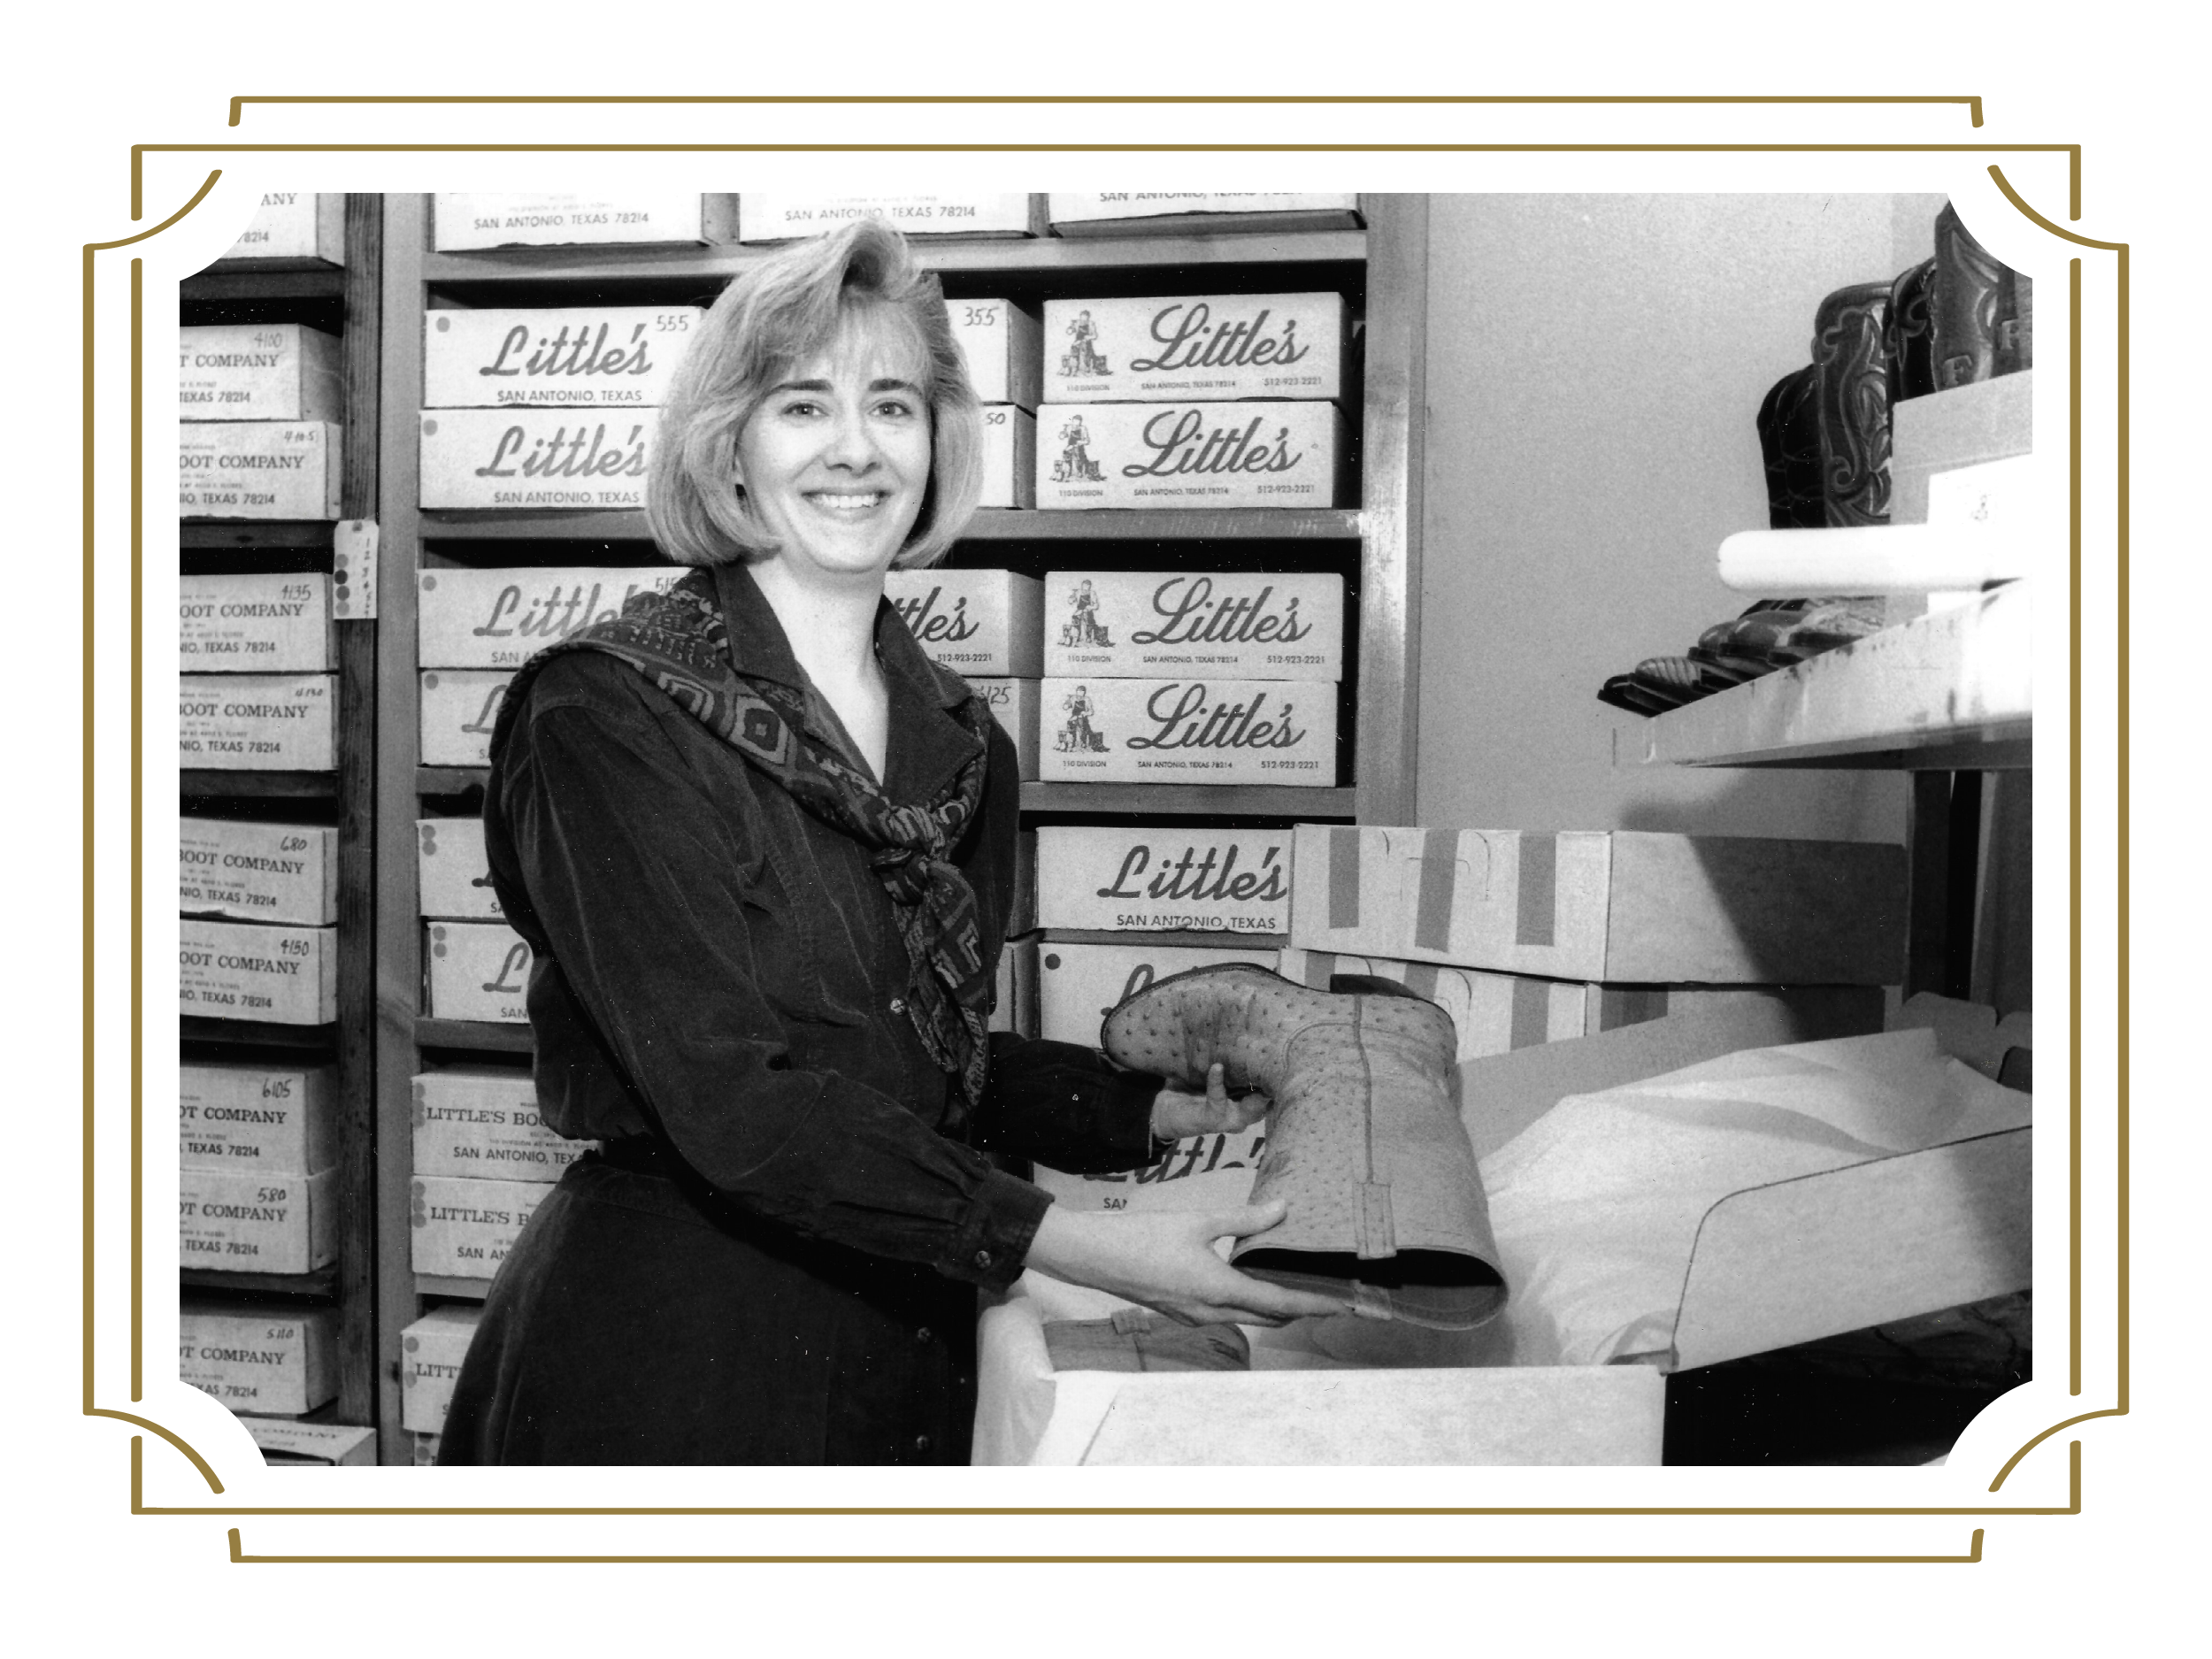 A woman stands in a store, holding a boot among shelves filled with boxes labeled "Little's."